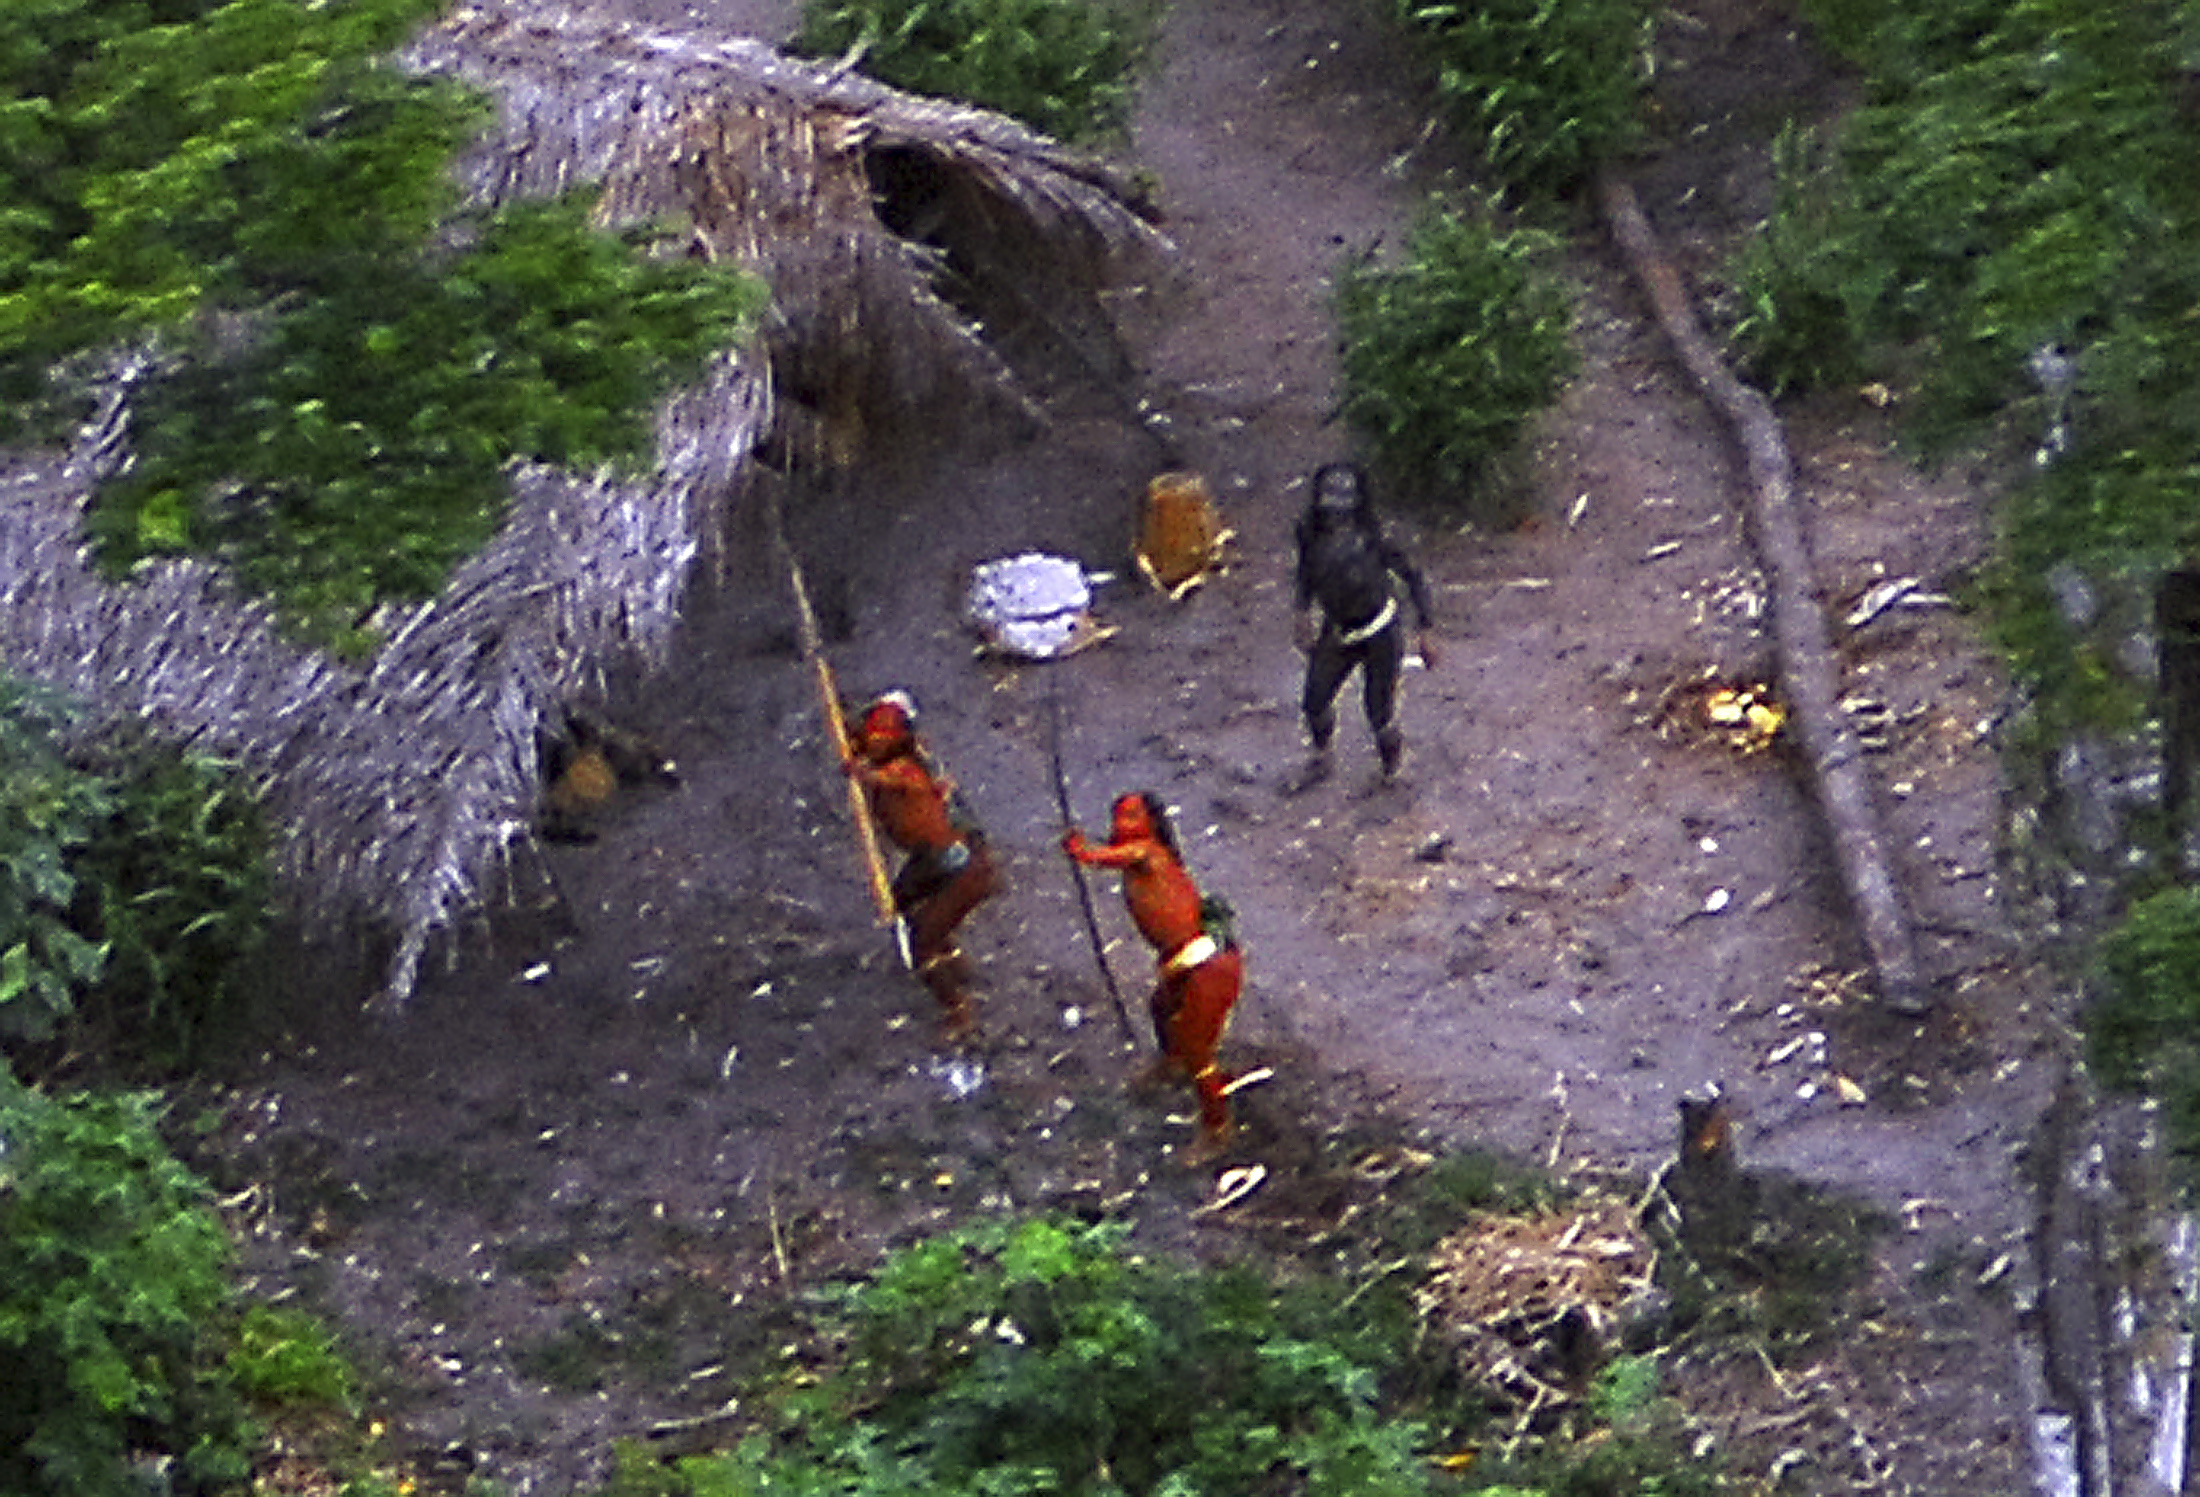 Handout photo shows members of an uncontacted Amazon Basin tribe and their dwellings during a flight over the Brazilian state of Acre along the border with Peru